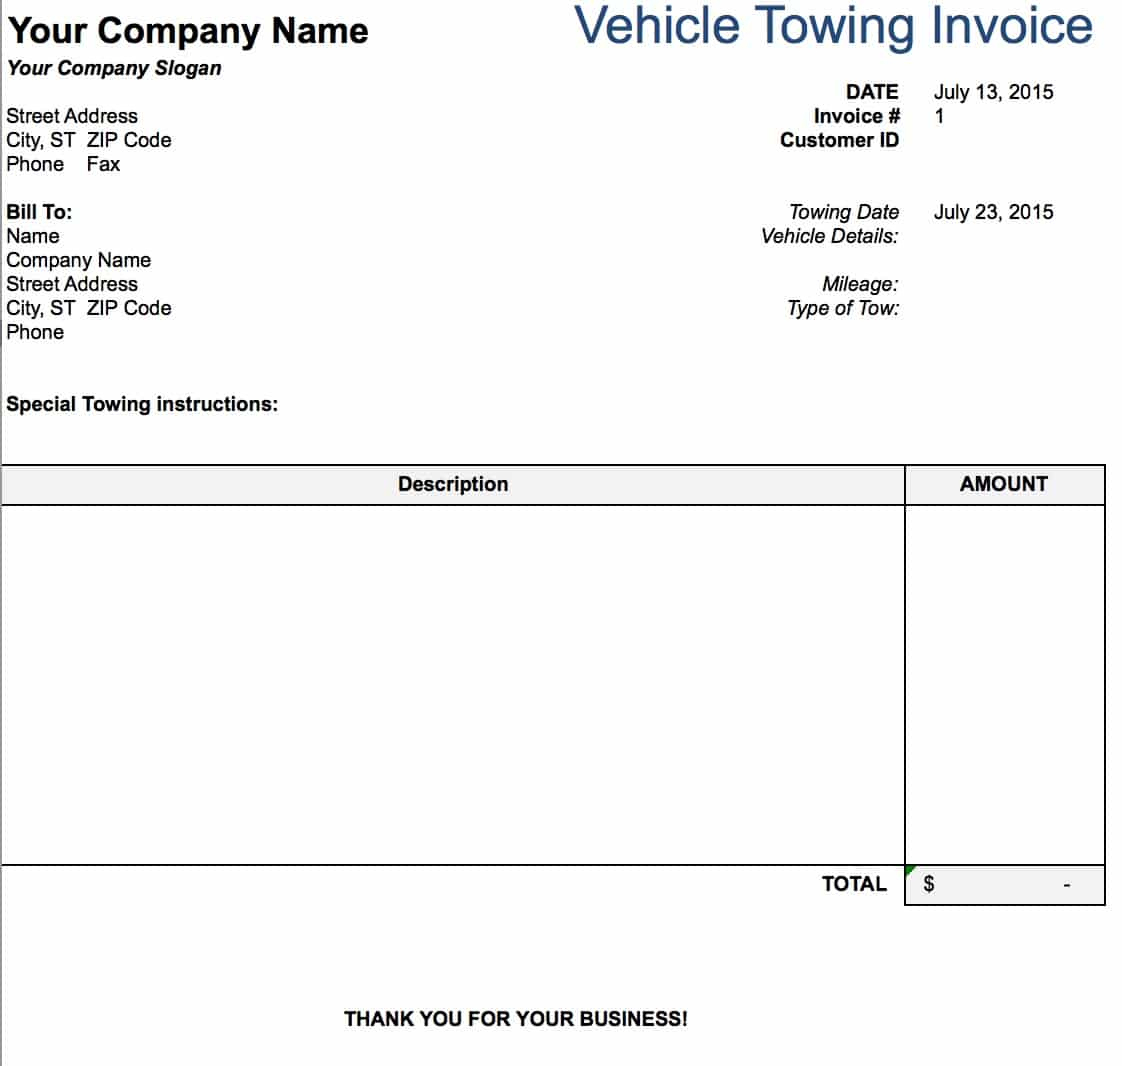 Free Towing Service Invoice Template | Pdf | Word | Excel within Towing Service Invoice Template